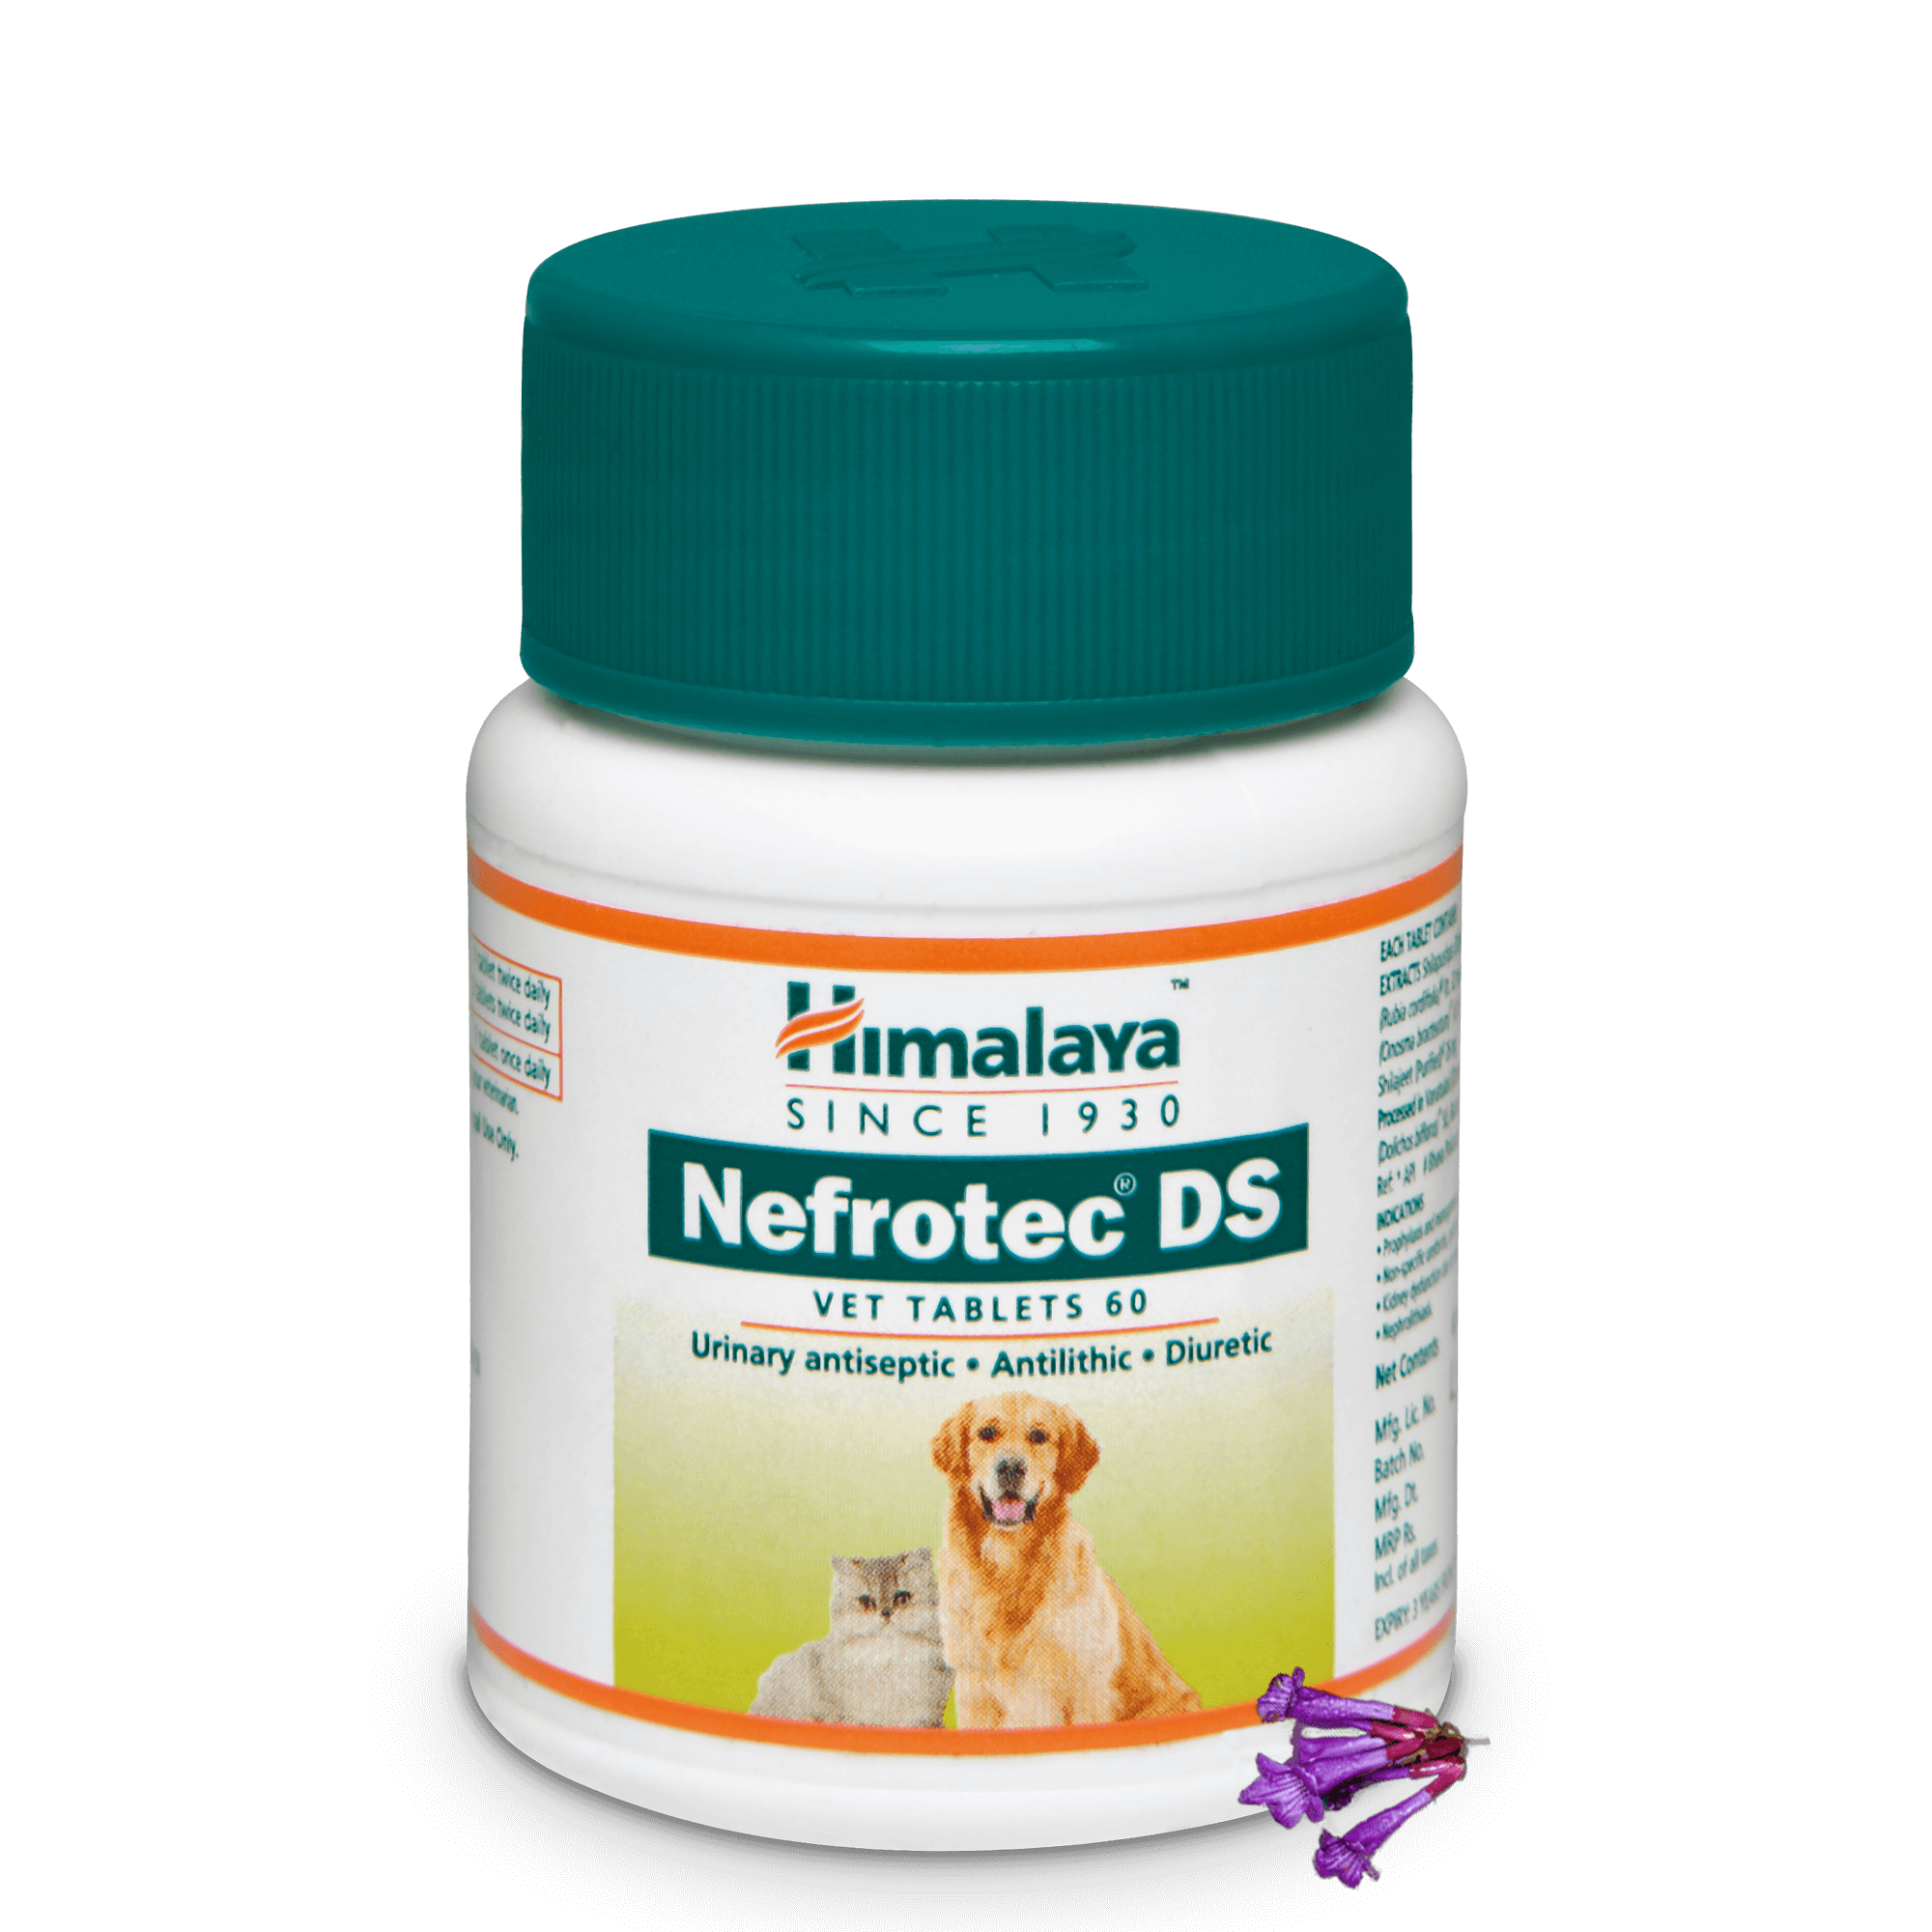 Himalaya Nefrotec DS Vet Tablet - Urinary Antiseptic 